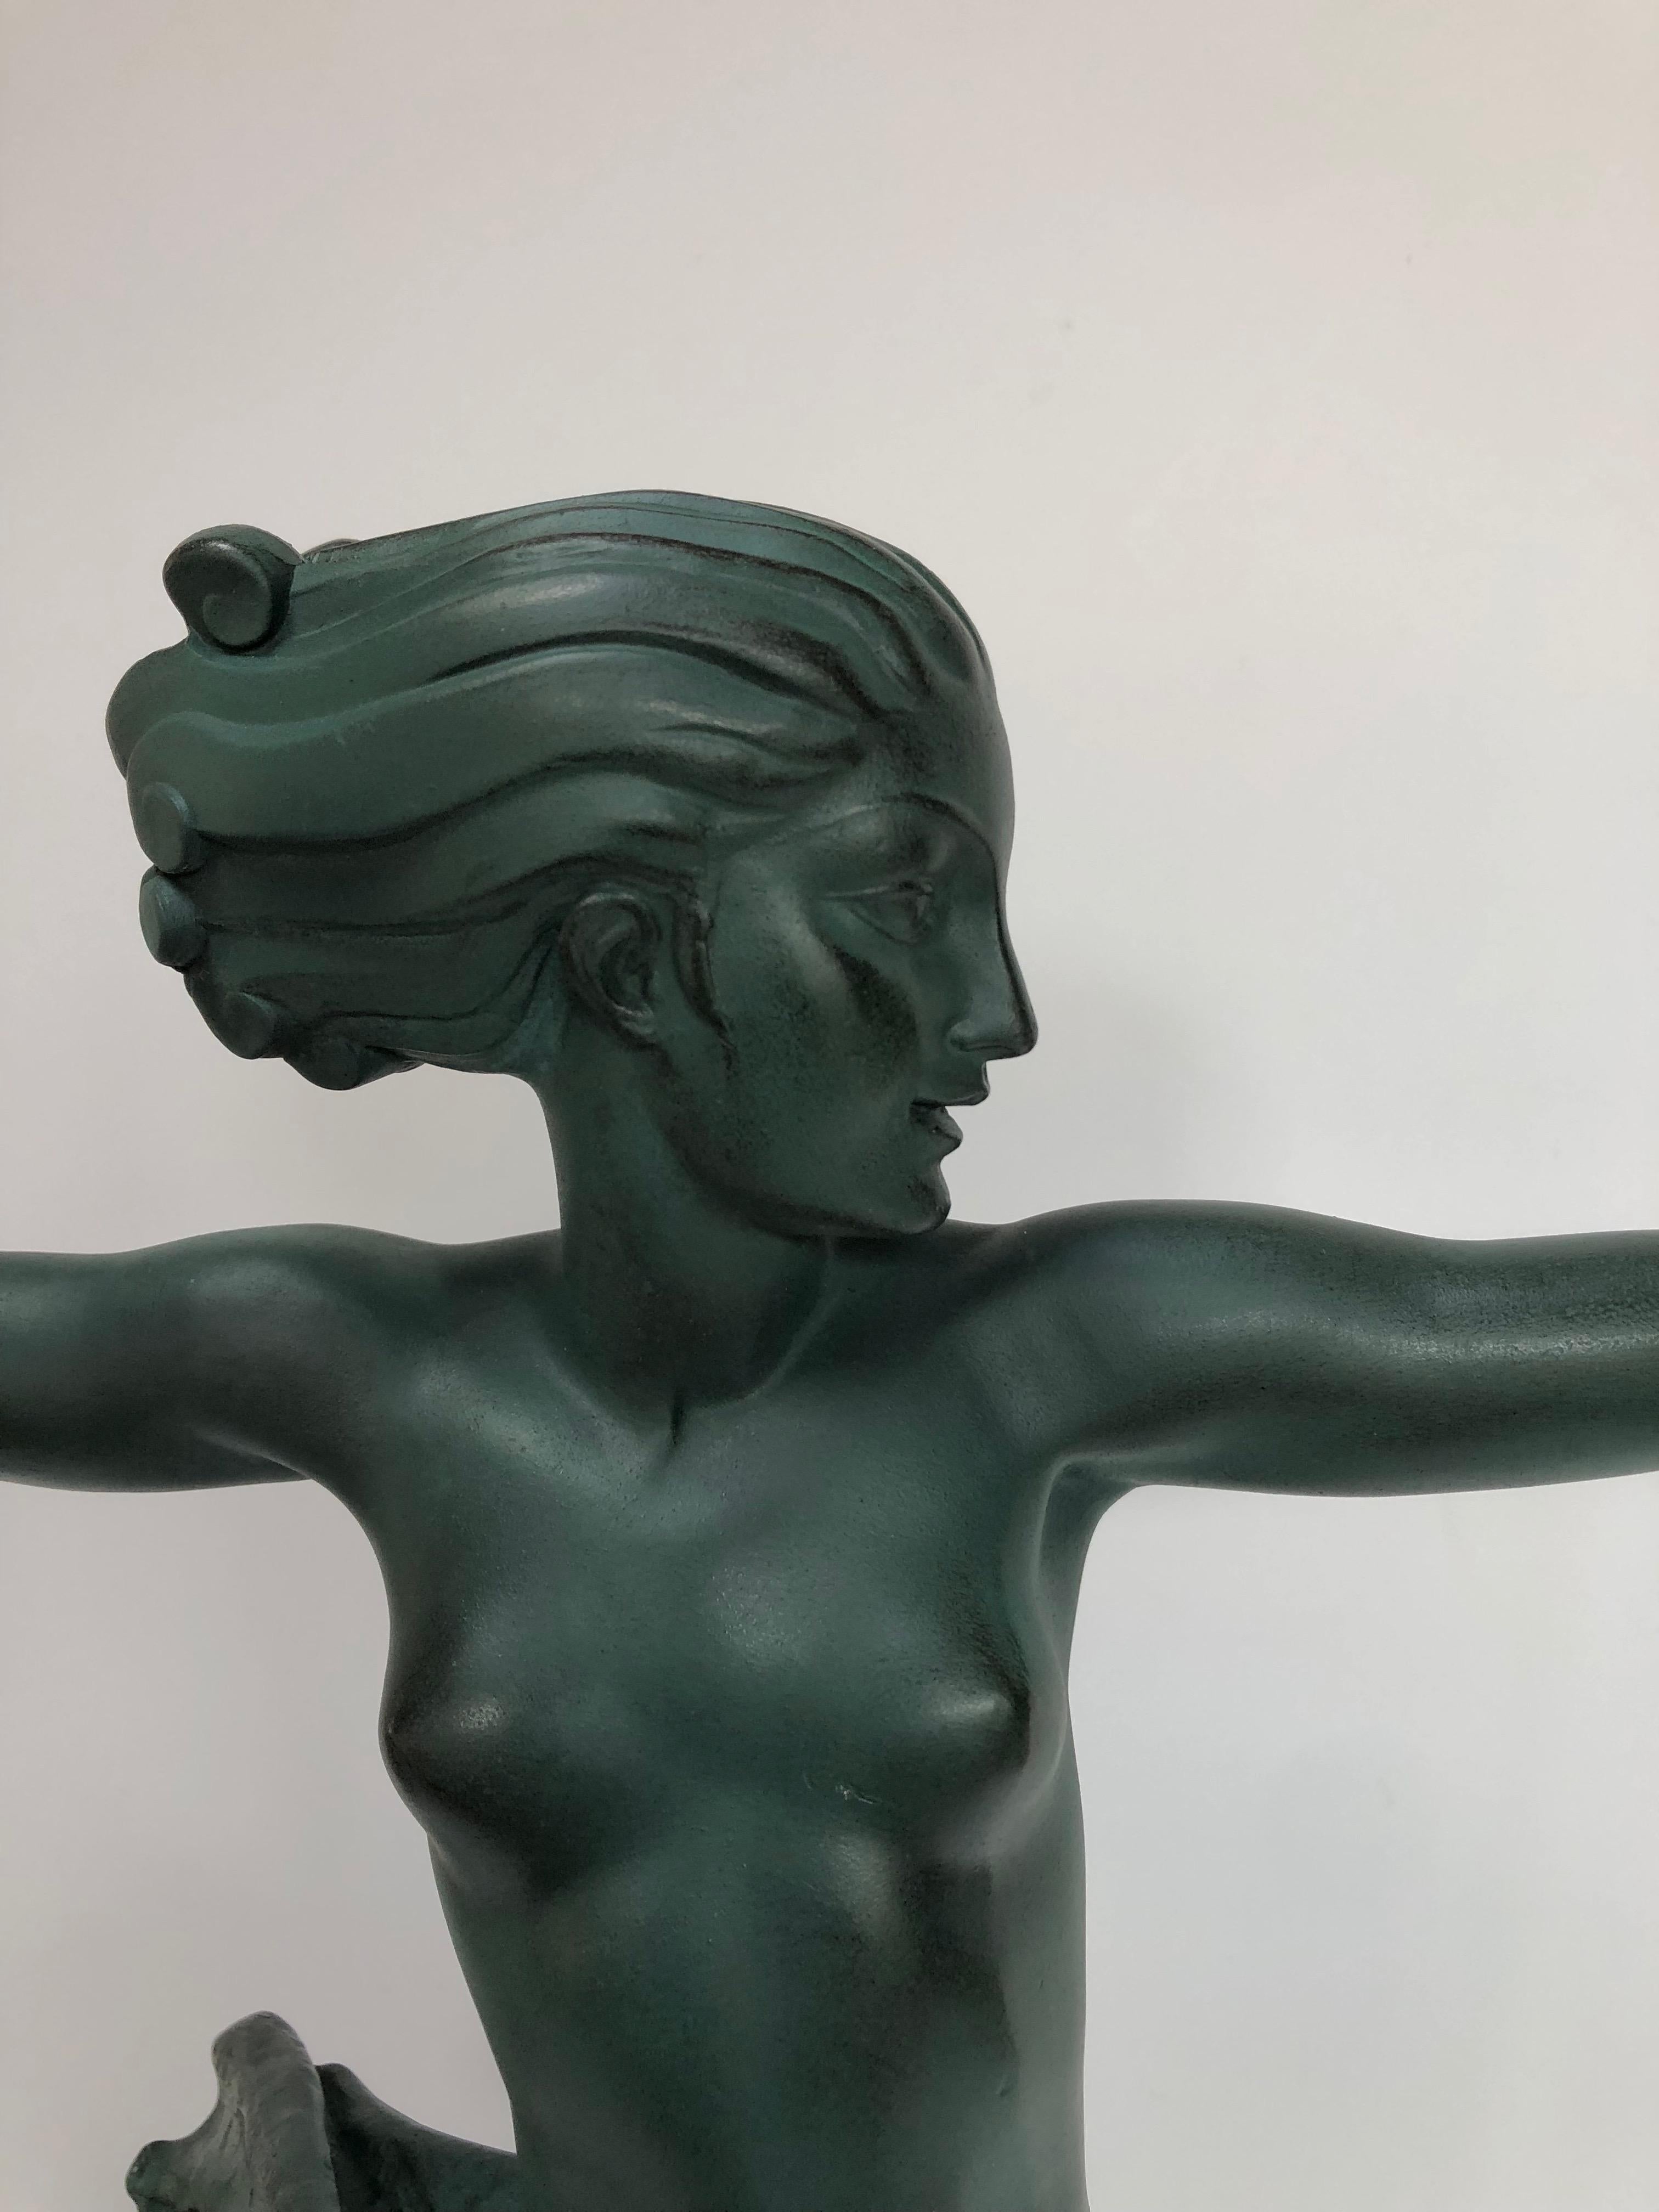 Art deco sculpture circa 1930 in spelter with green patina.
Large model, Portor marble base.
In perfect condition.
 Signed on the marble M. le verrier
Total height: 80 cm
Width: 41 cm
Depth: 16.5 cm
Weight: 12 Kg


Max Le Verrier was born on 29